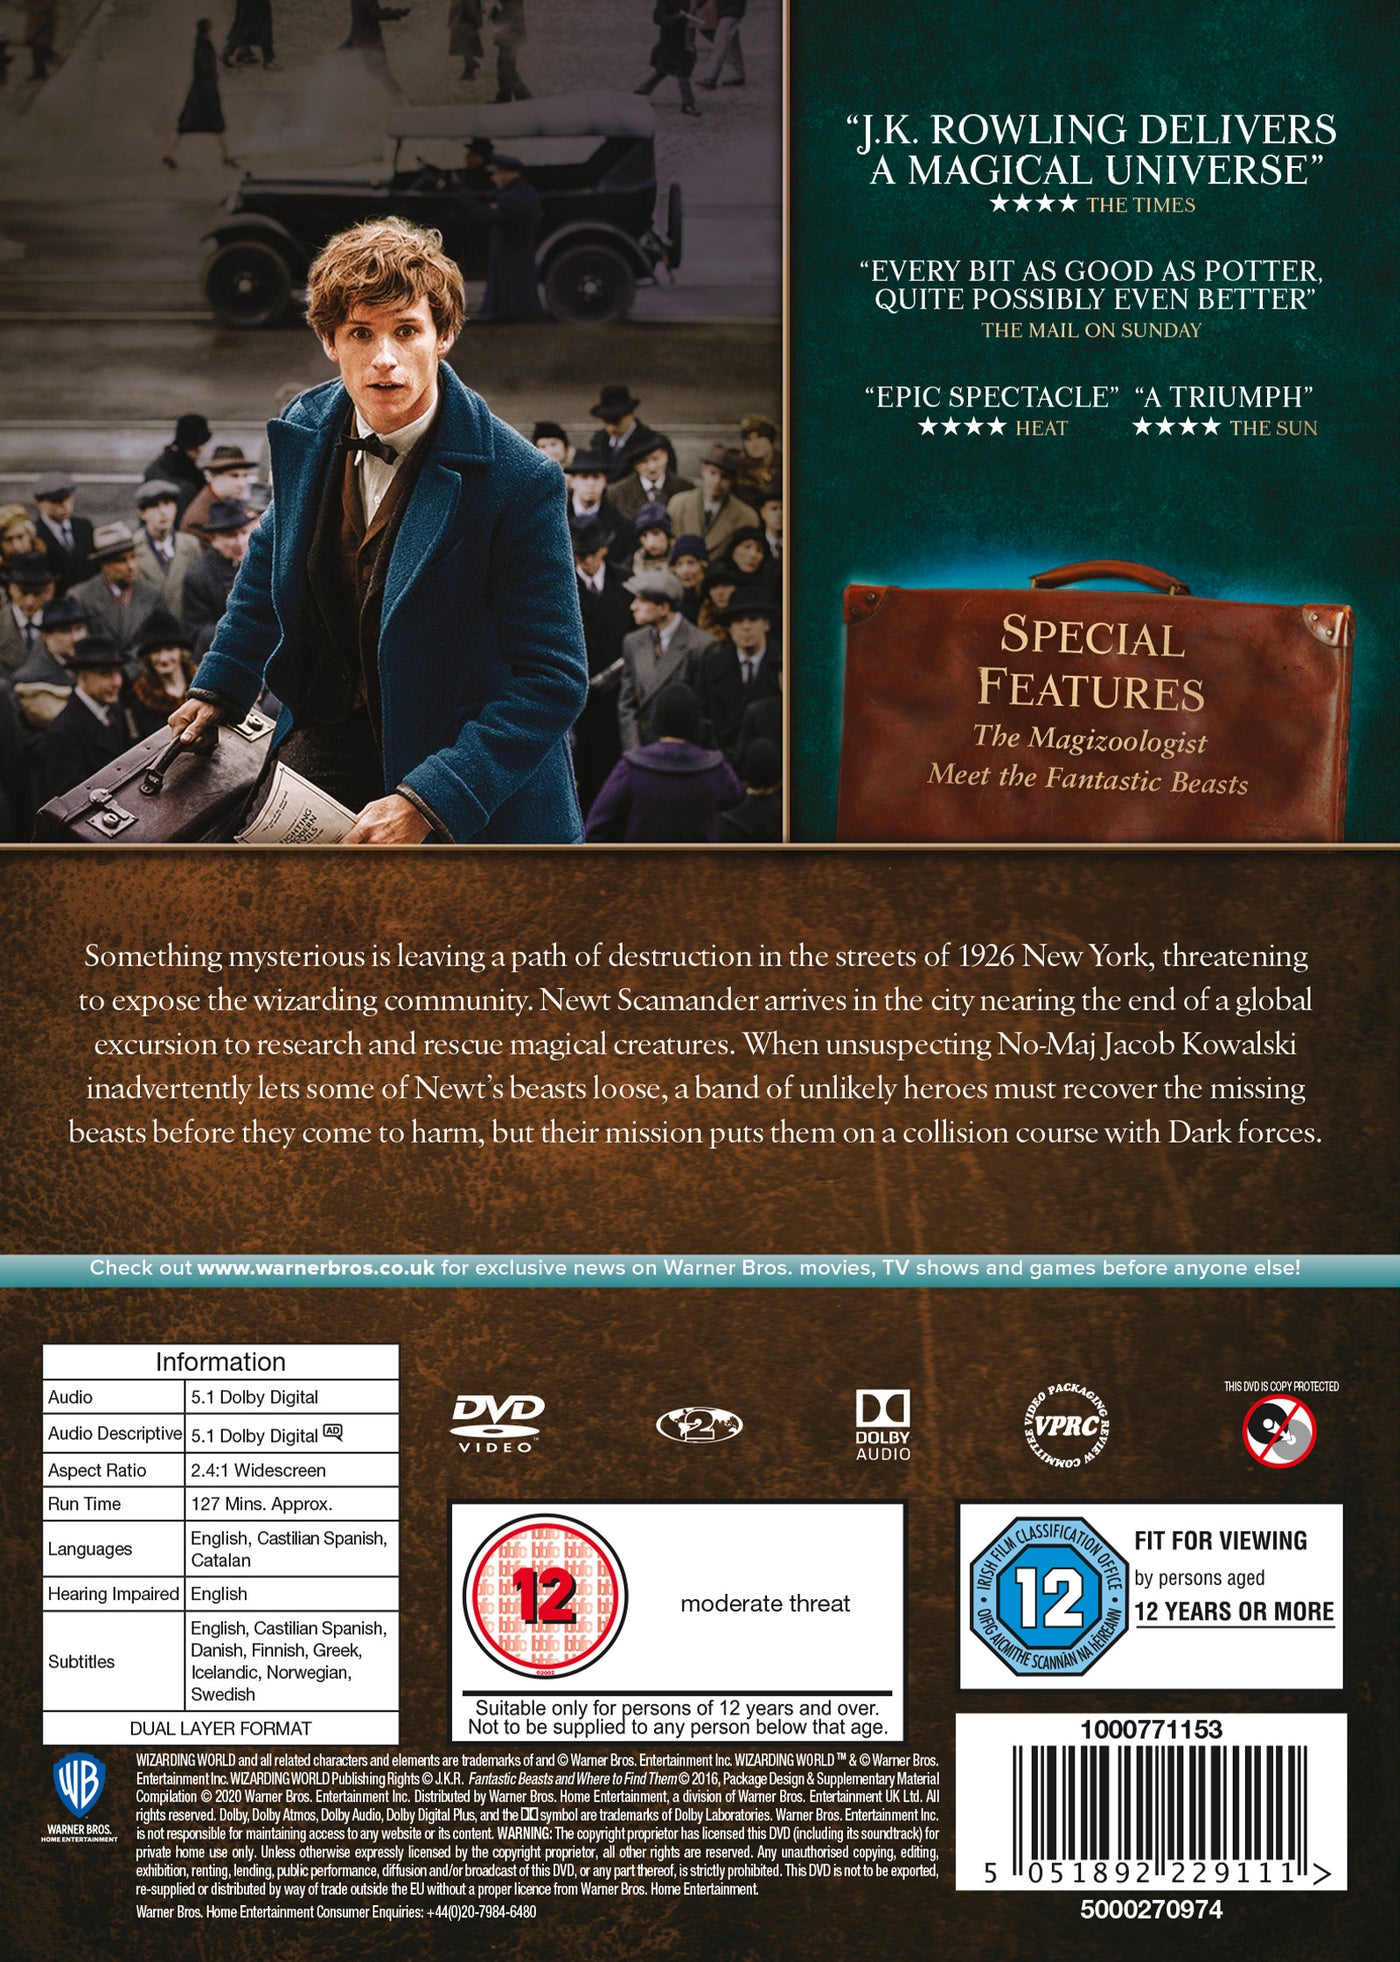 Fantastic Beasts and Where to Find Them (DVD) (2016)